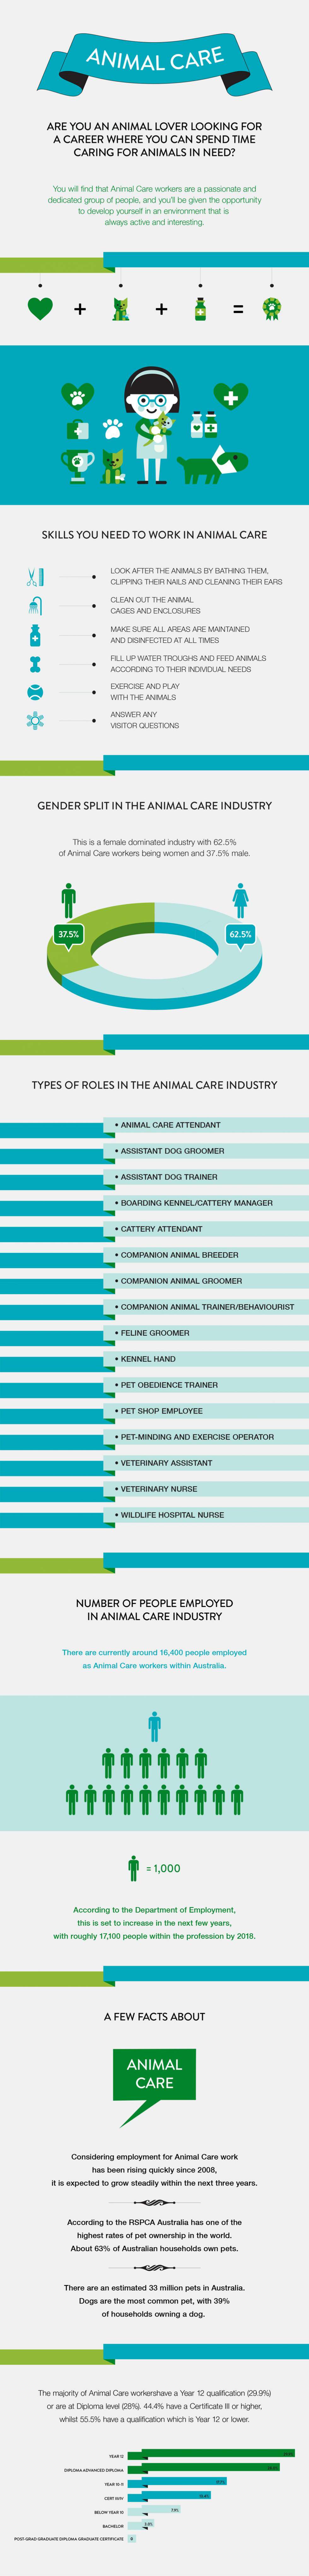 Career-in-the-Animal-Care-Industry